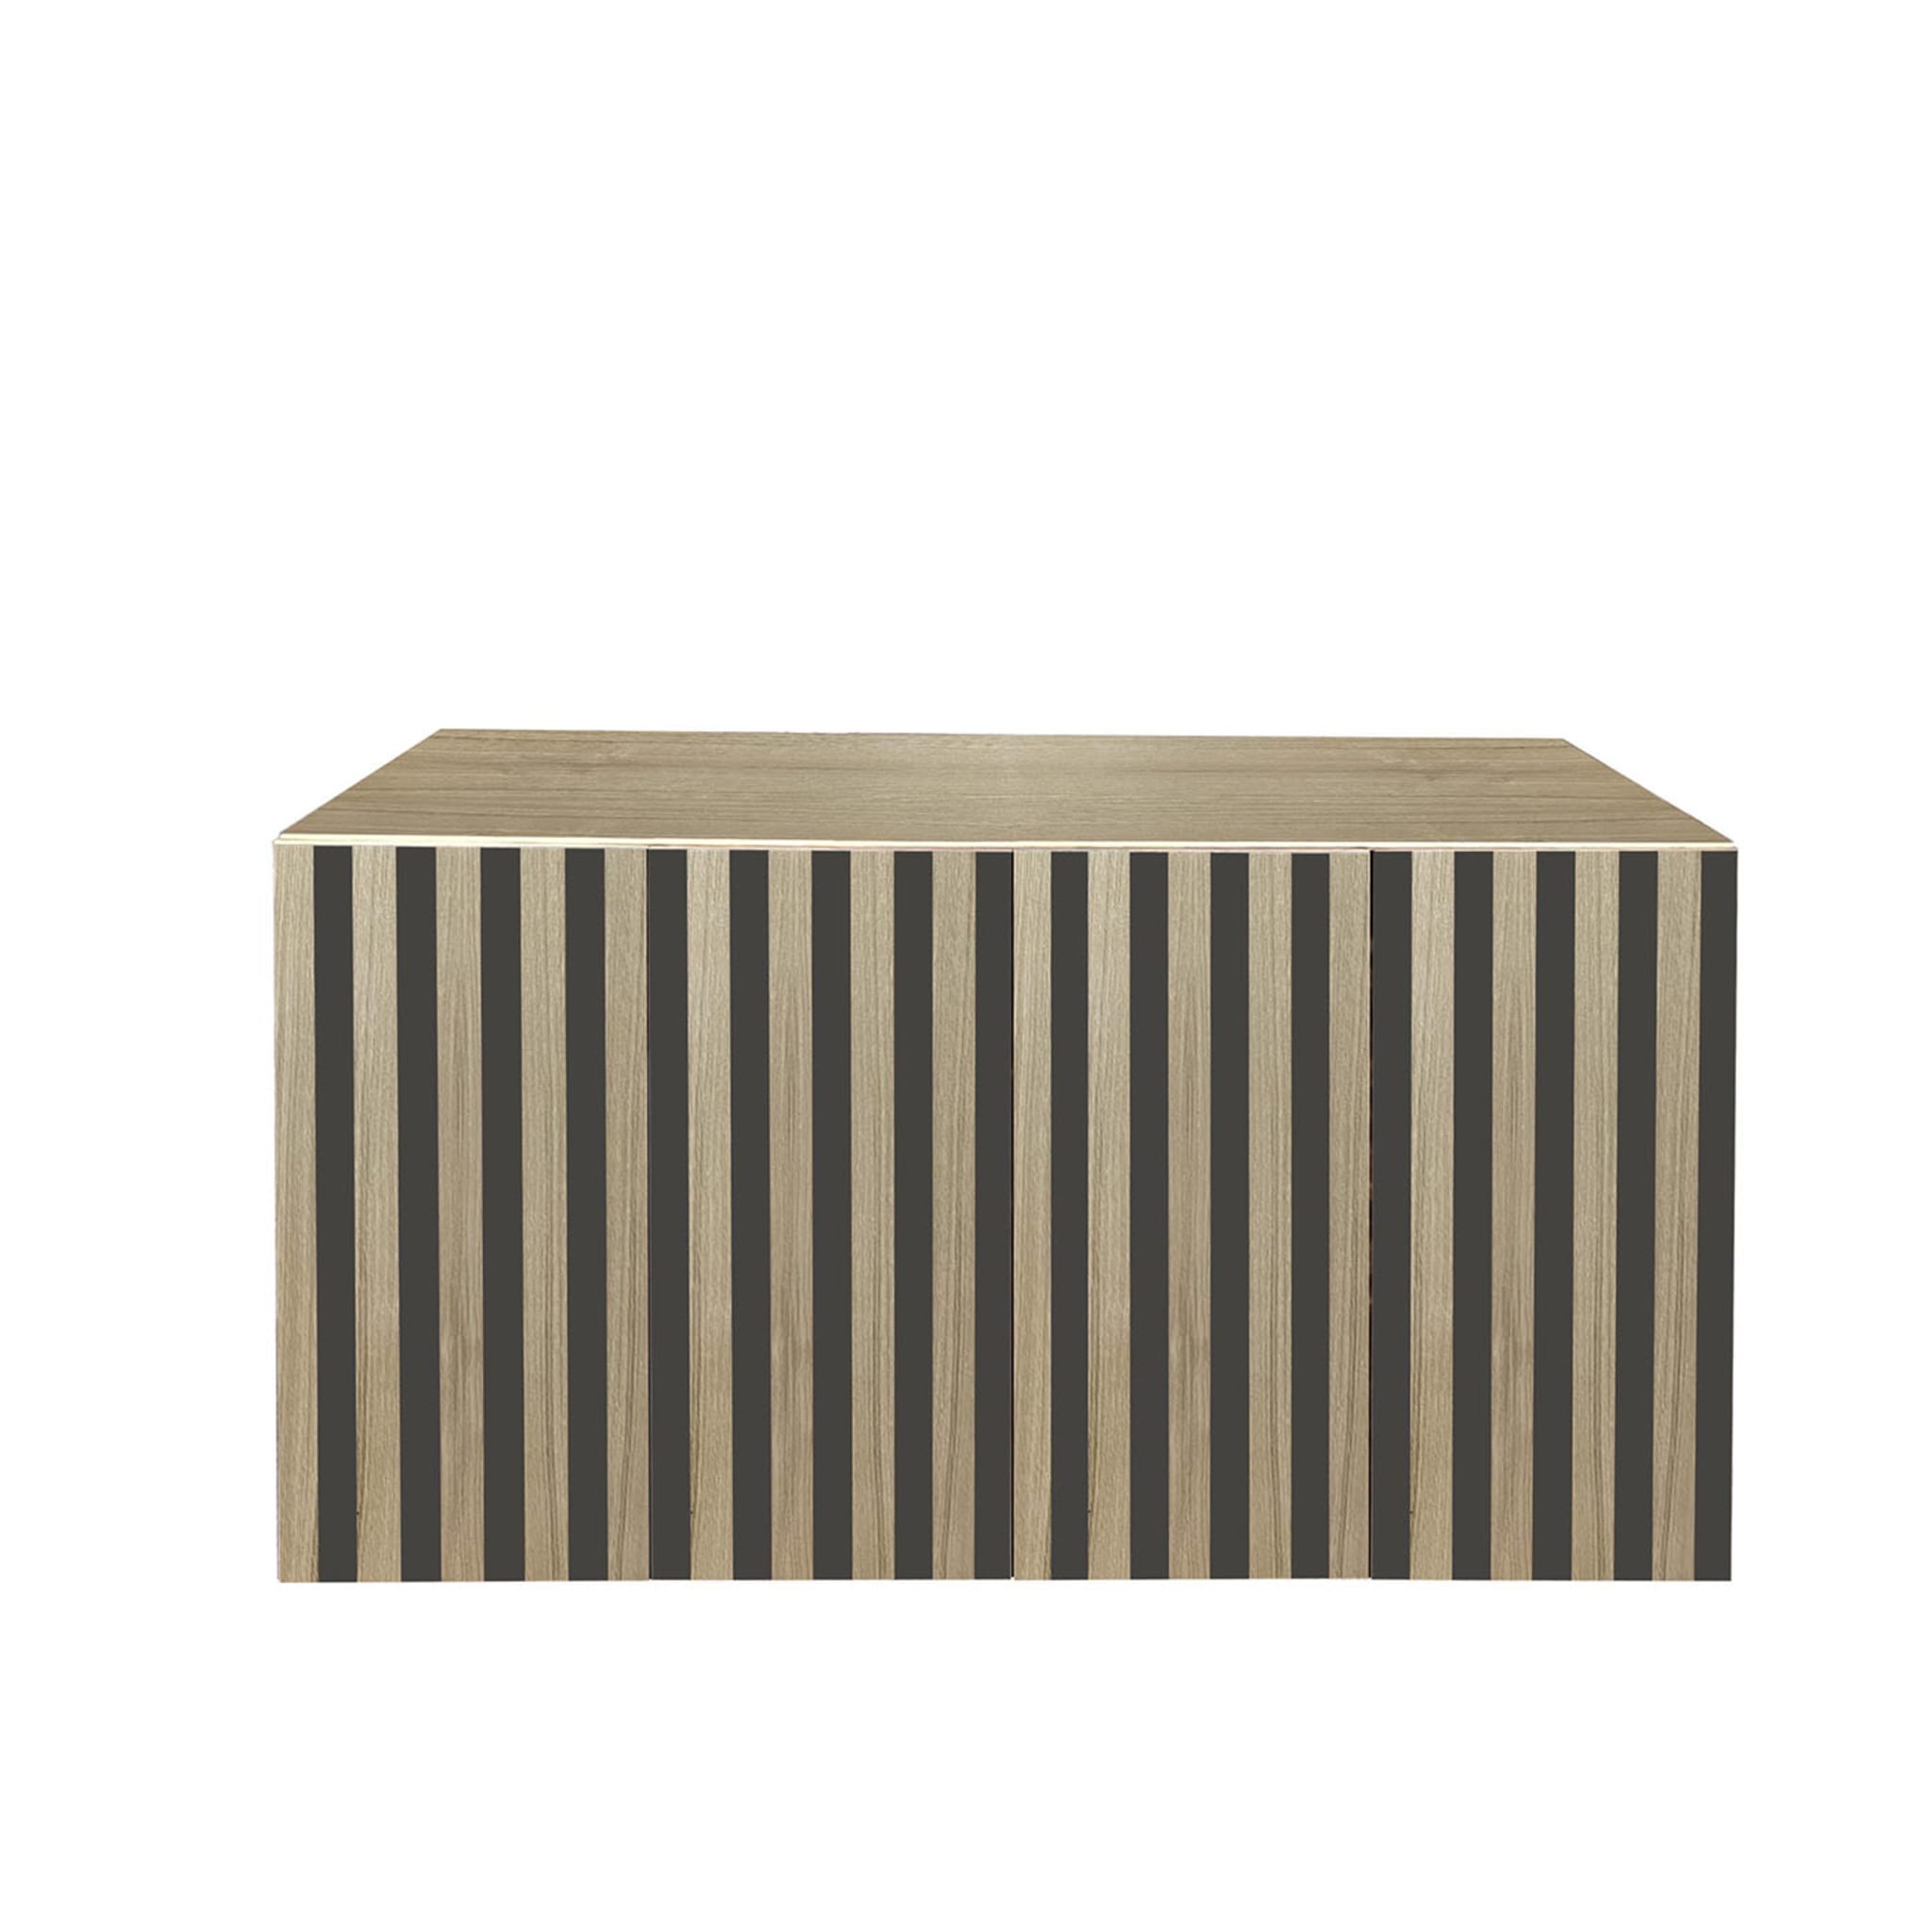 Md1 4-Door Striped Sideboard by Meccani Studio - Alternative view 1